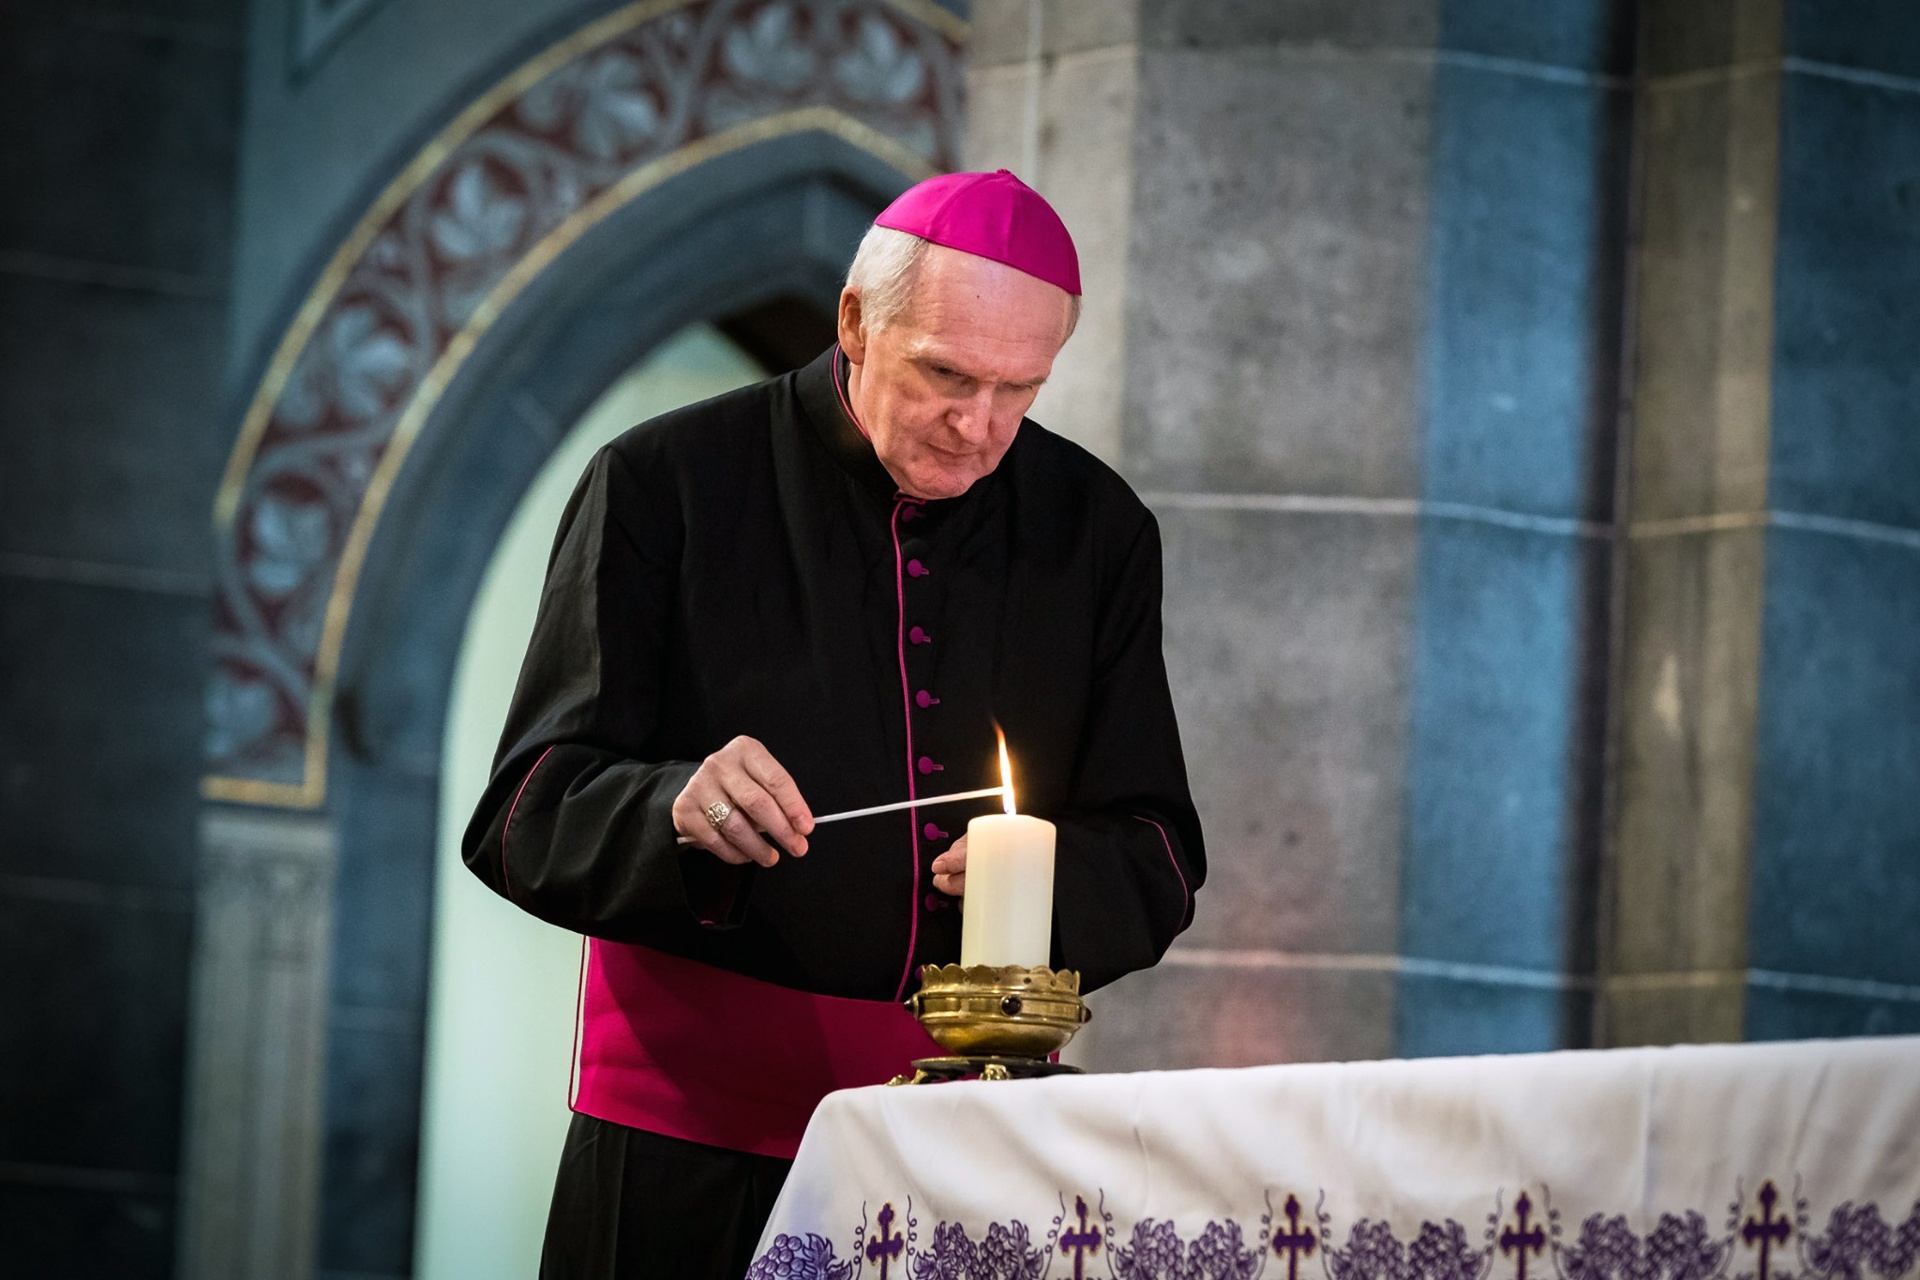 We must prepare for what's coming – Bishop Leahy